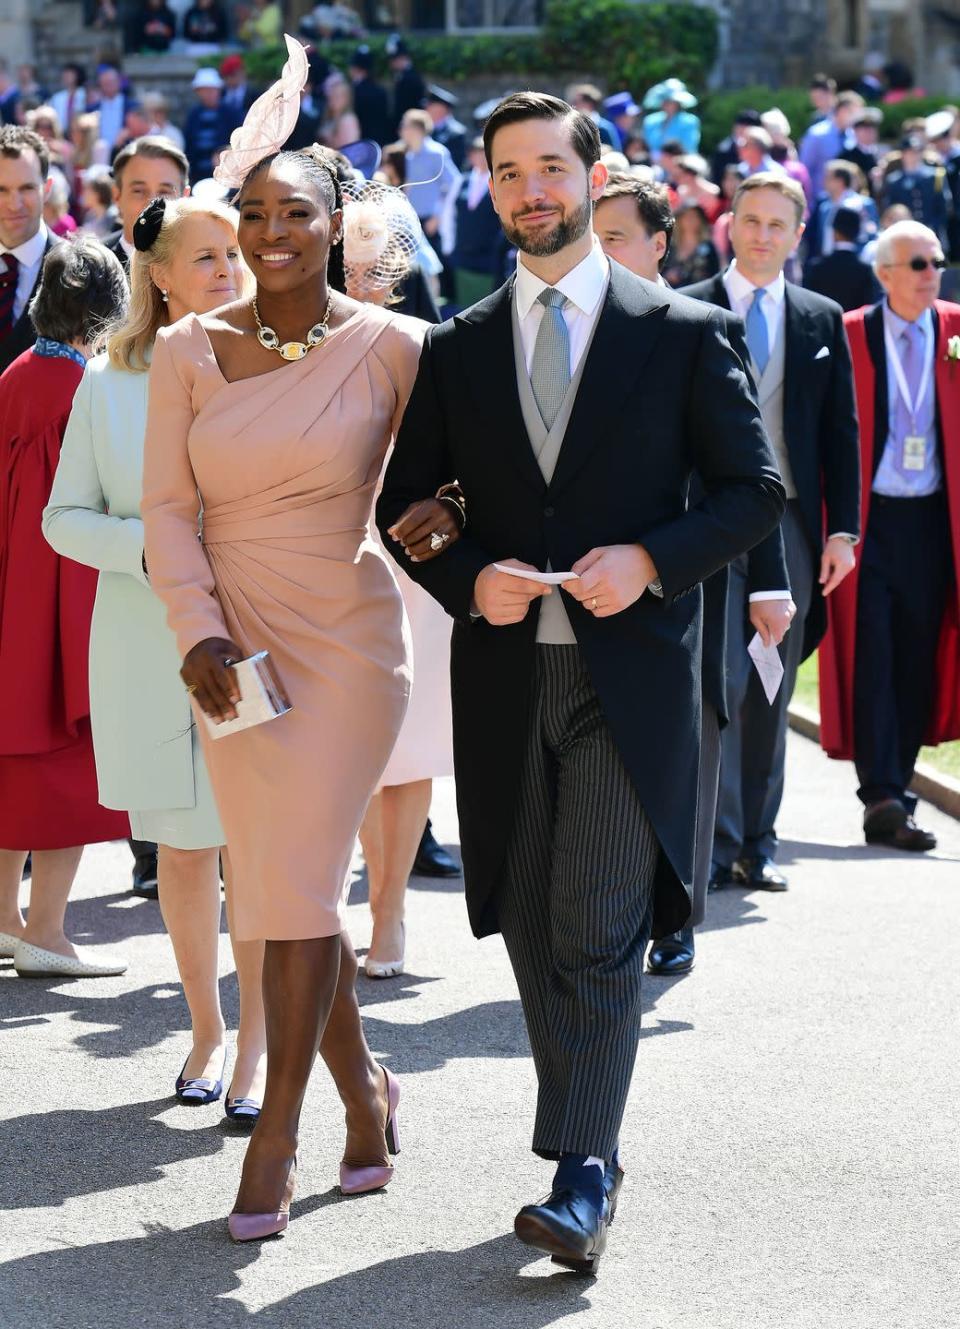 <p>Serena Williams knocked it out the park in her stunning pink structured dress, alongside husband Alexis Ohanian, as they arrived at Meghan and Harry's big day at Windsor Castle. </p>